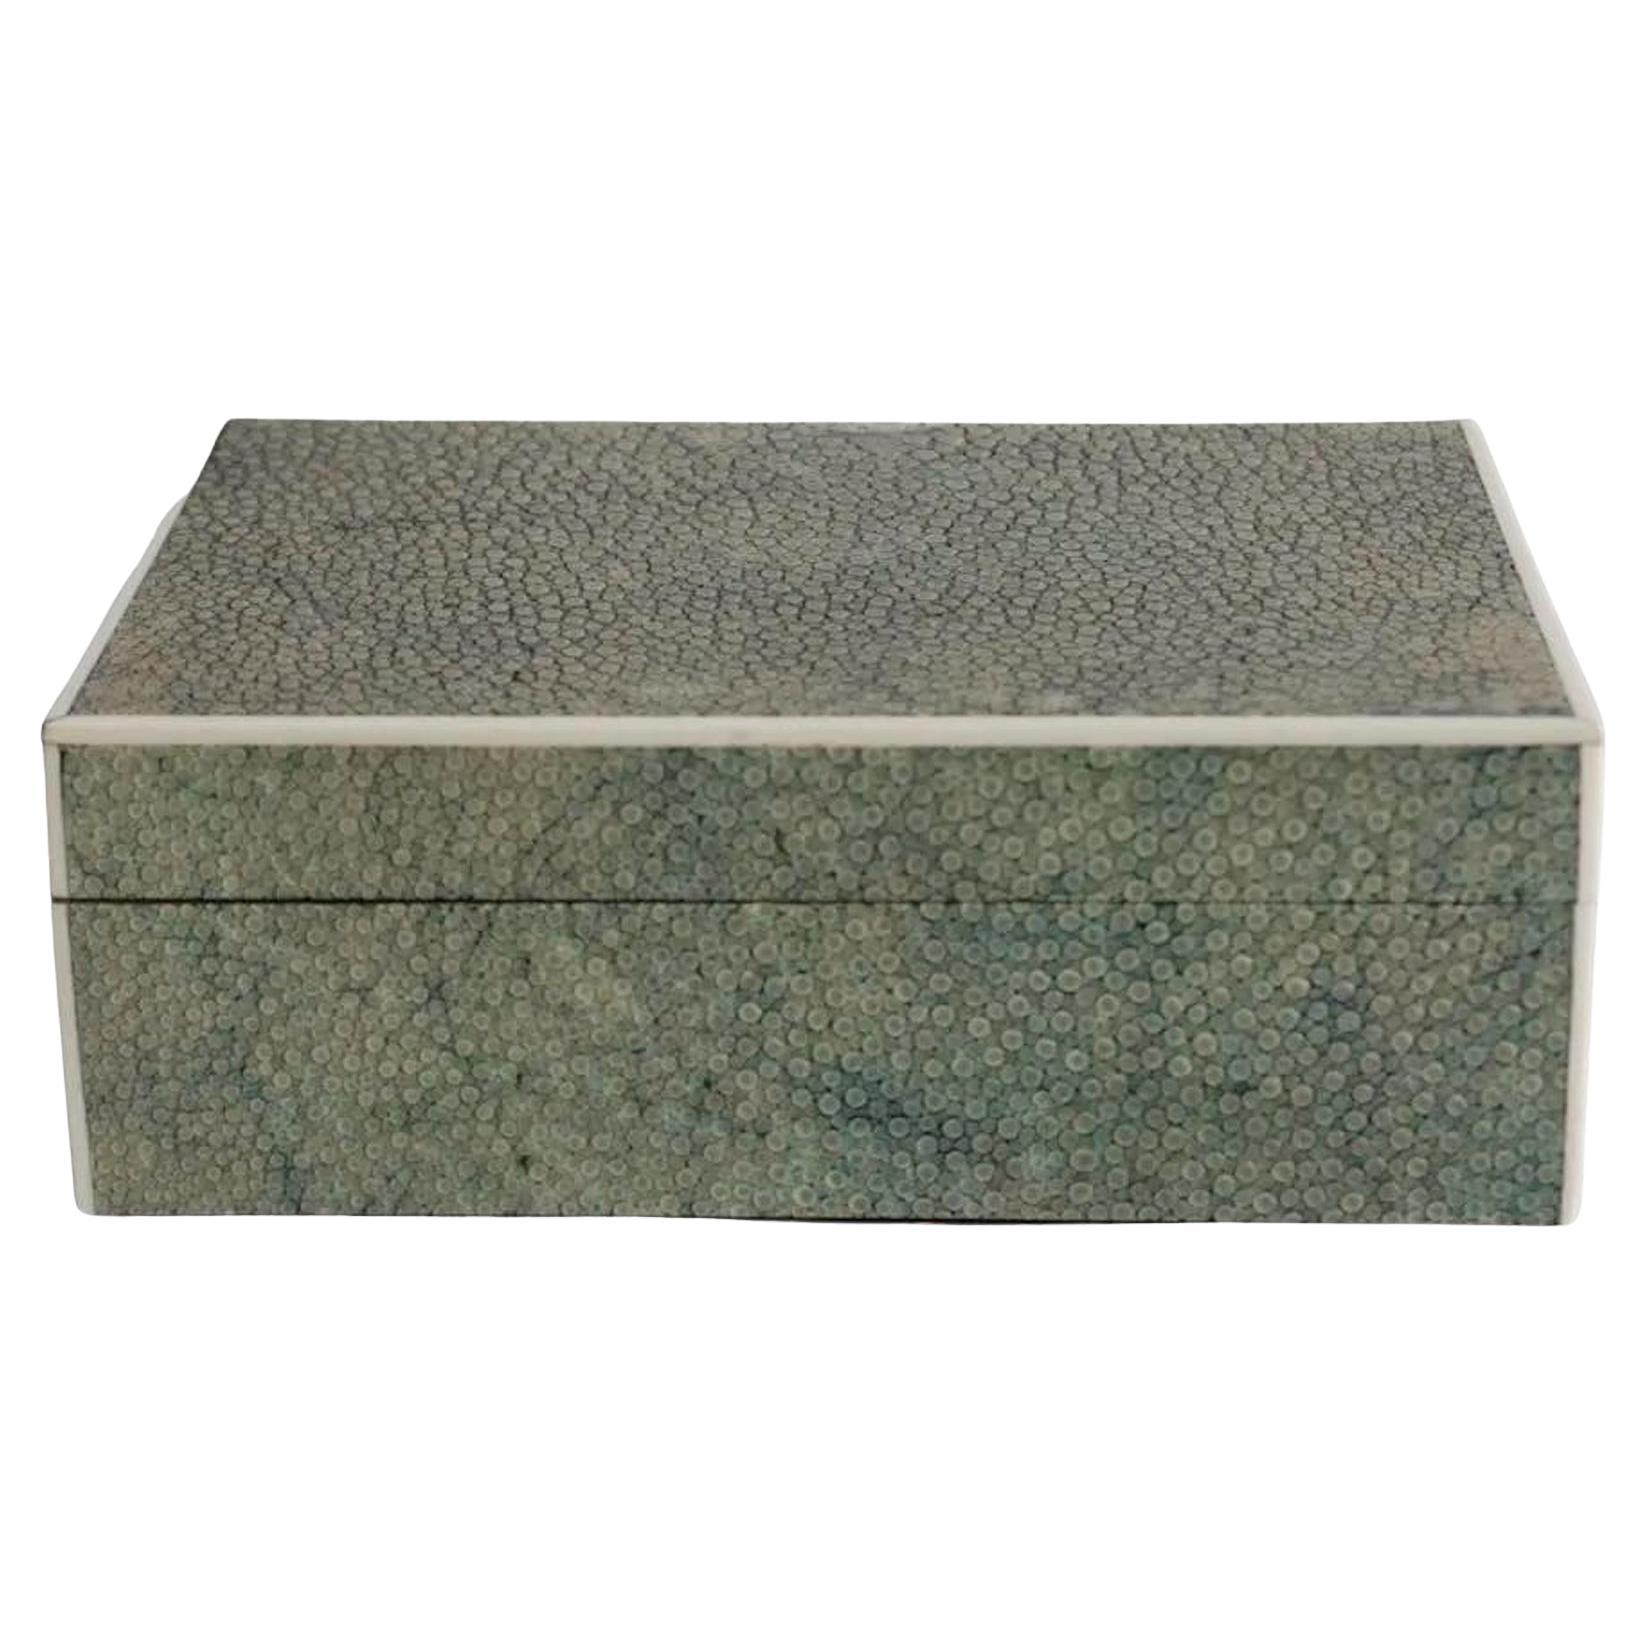 Art Deco Table Box Covered in Green Shagreen & Marked "London Made" For Sale